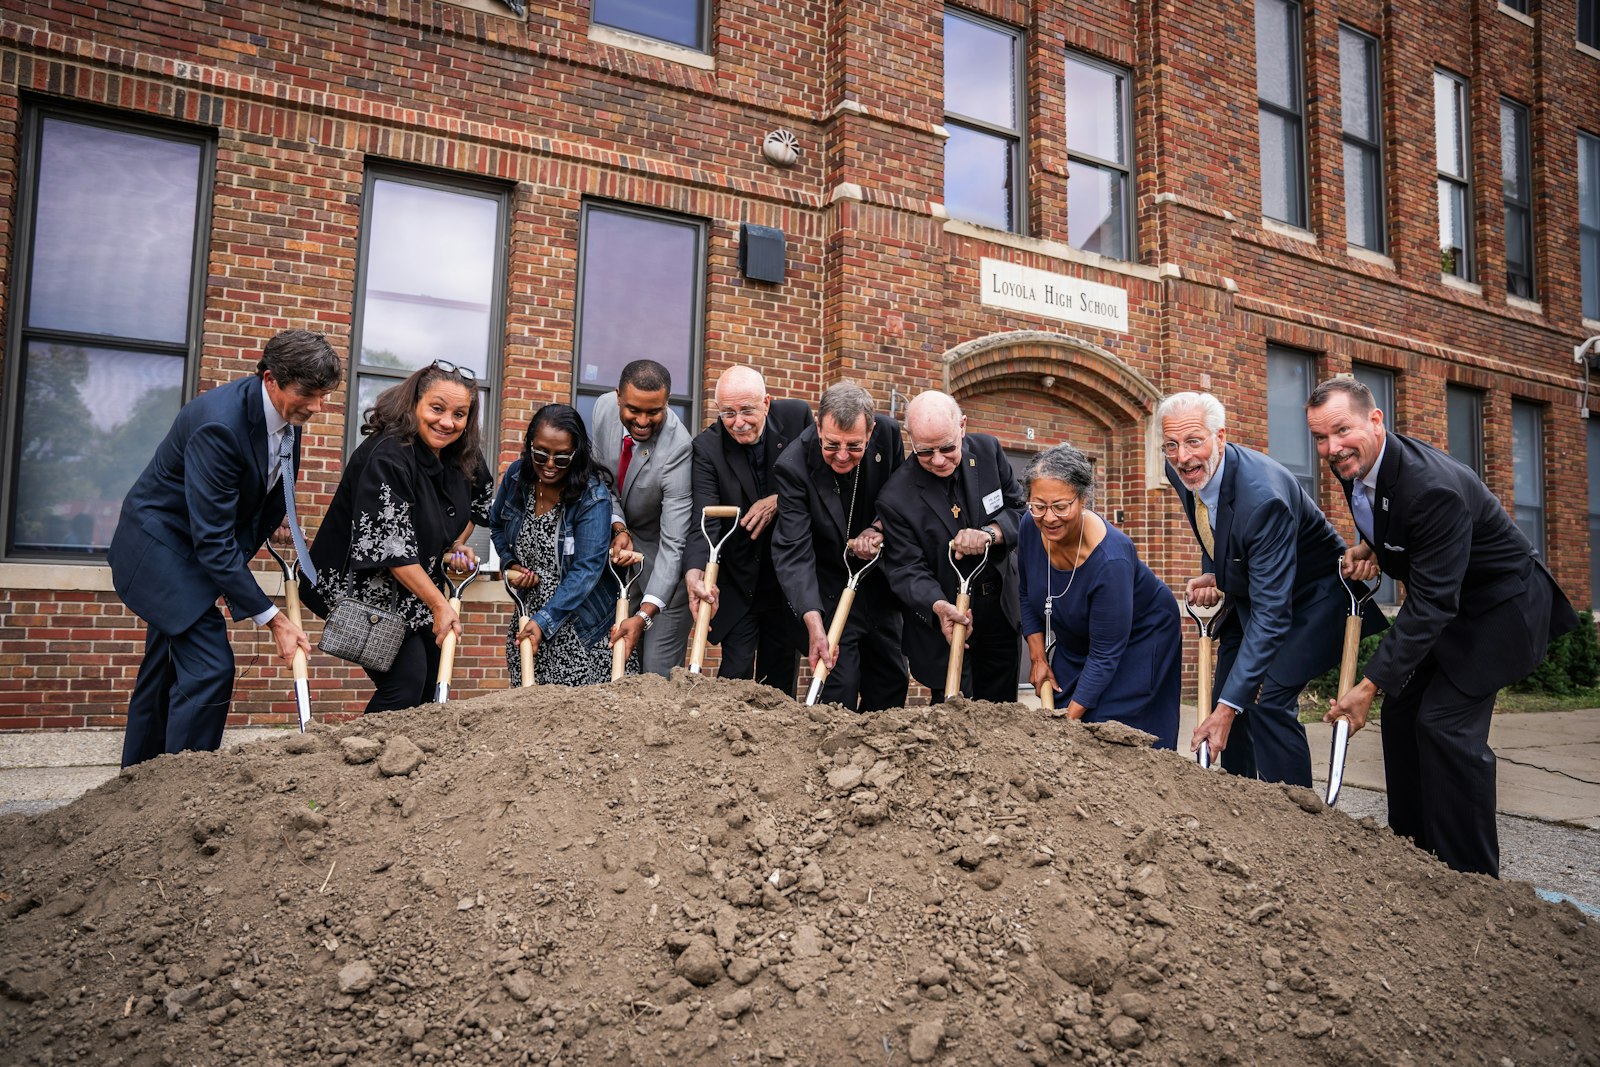 Dignitaries from the Archdiocese of Detroit, Loyola High School and the city of Detroit break ground on a new 200-seat chapel at Loyola High School on Sept. 13, 2023, part of the school's $9 million "Empower Loyola" campaign. (Valaurian Waller | Detroit Catholic)